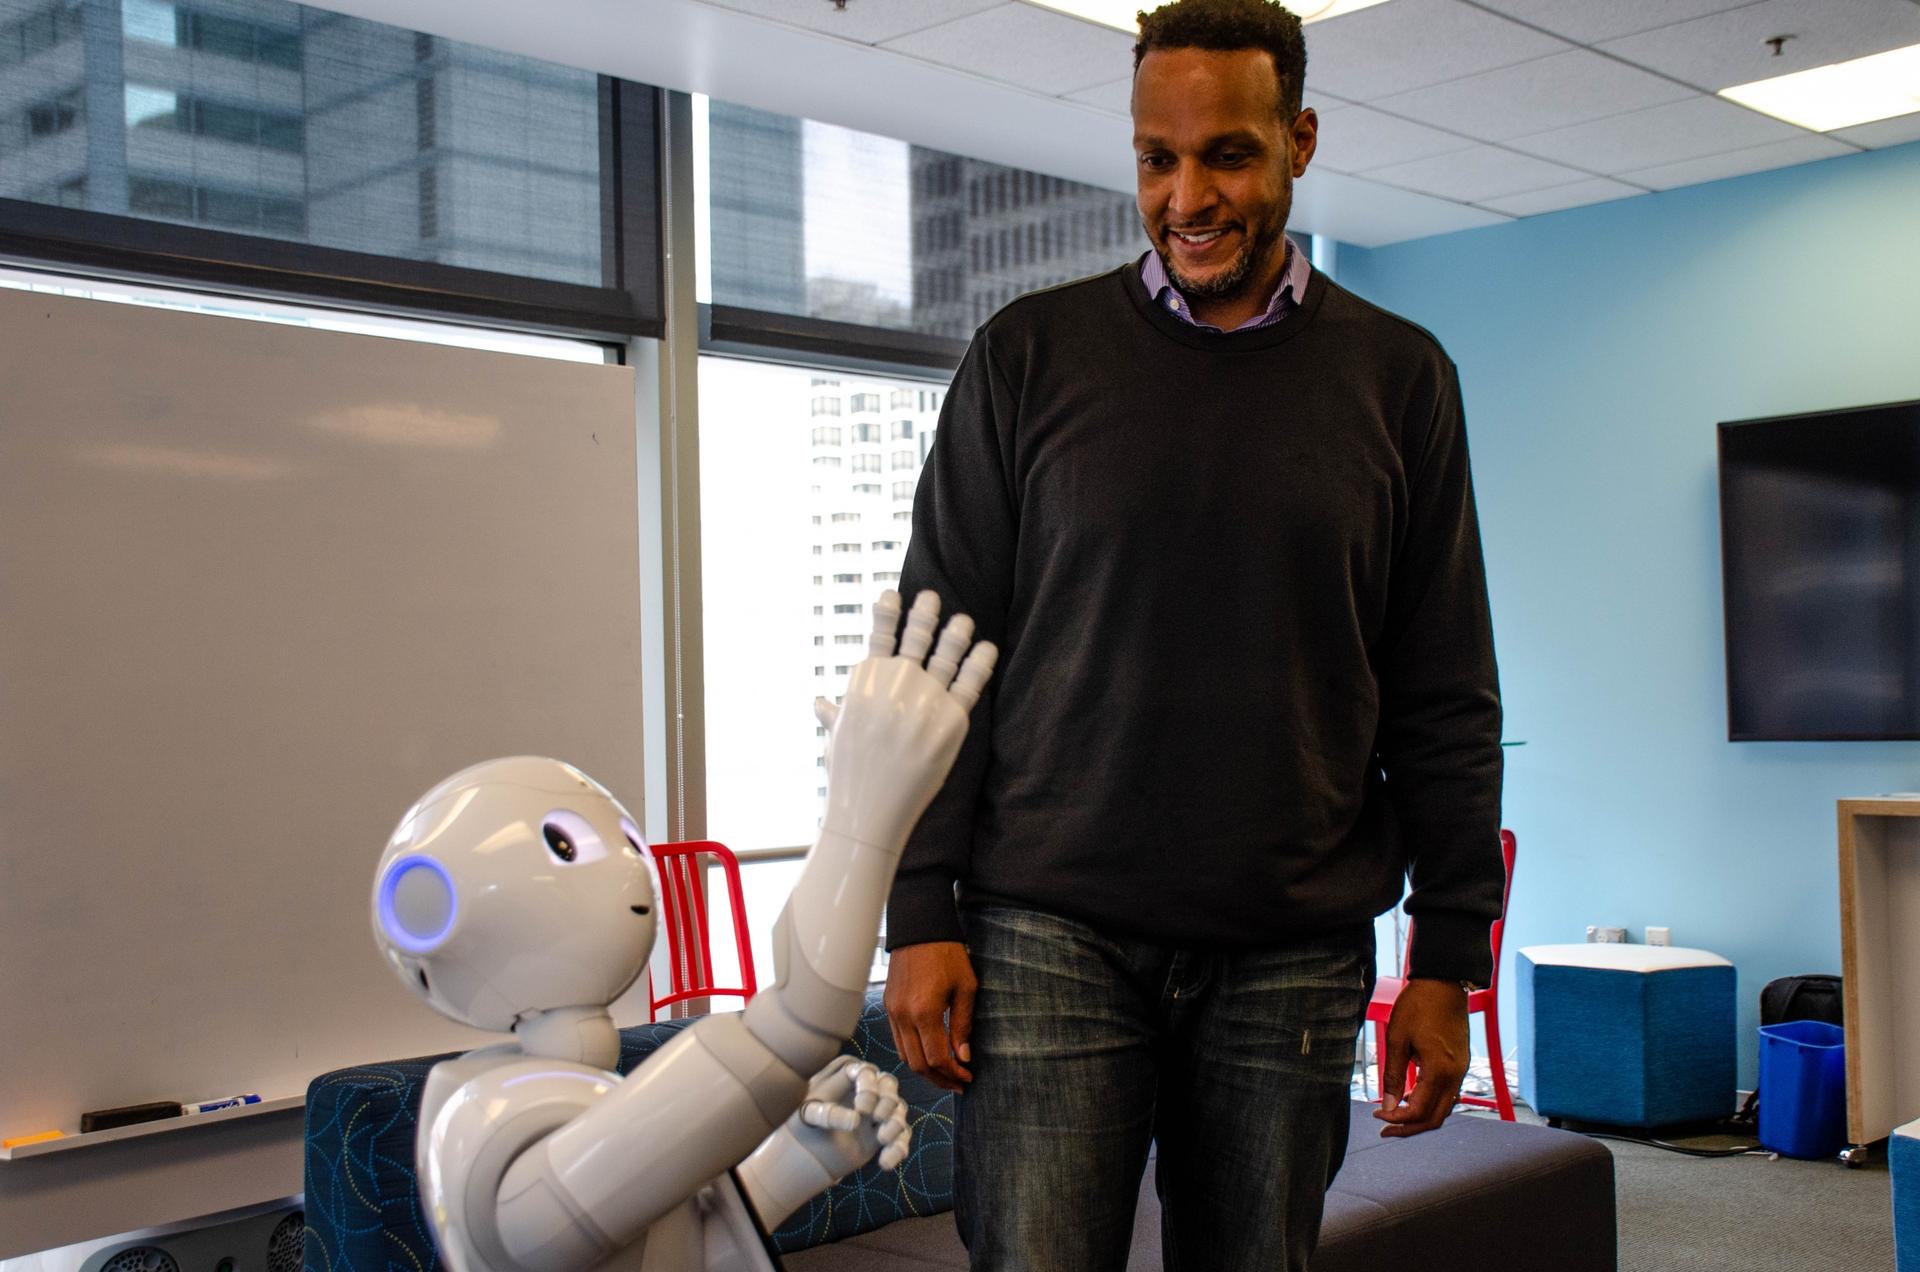 Softbank Robotics’ Kass Dawson, who stands 6’5” interacts with Pepper, the robot. Dawson says Pepper was designed to be four-feet-tall to make it more “approachable.”